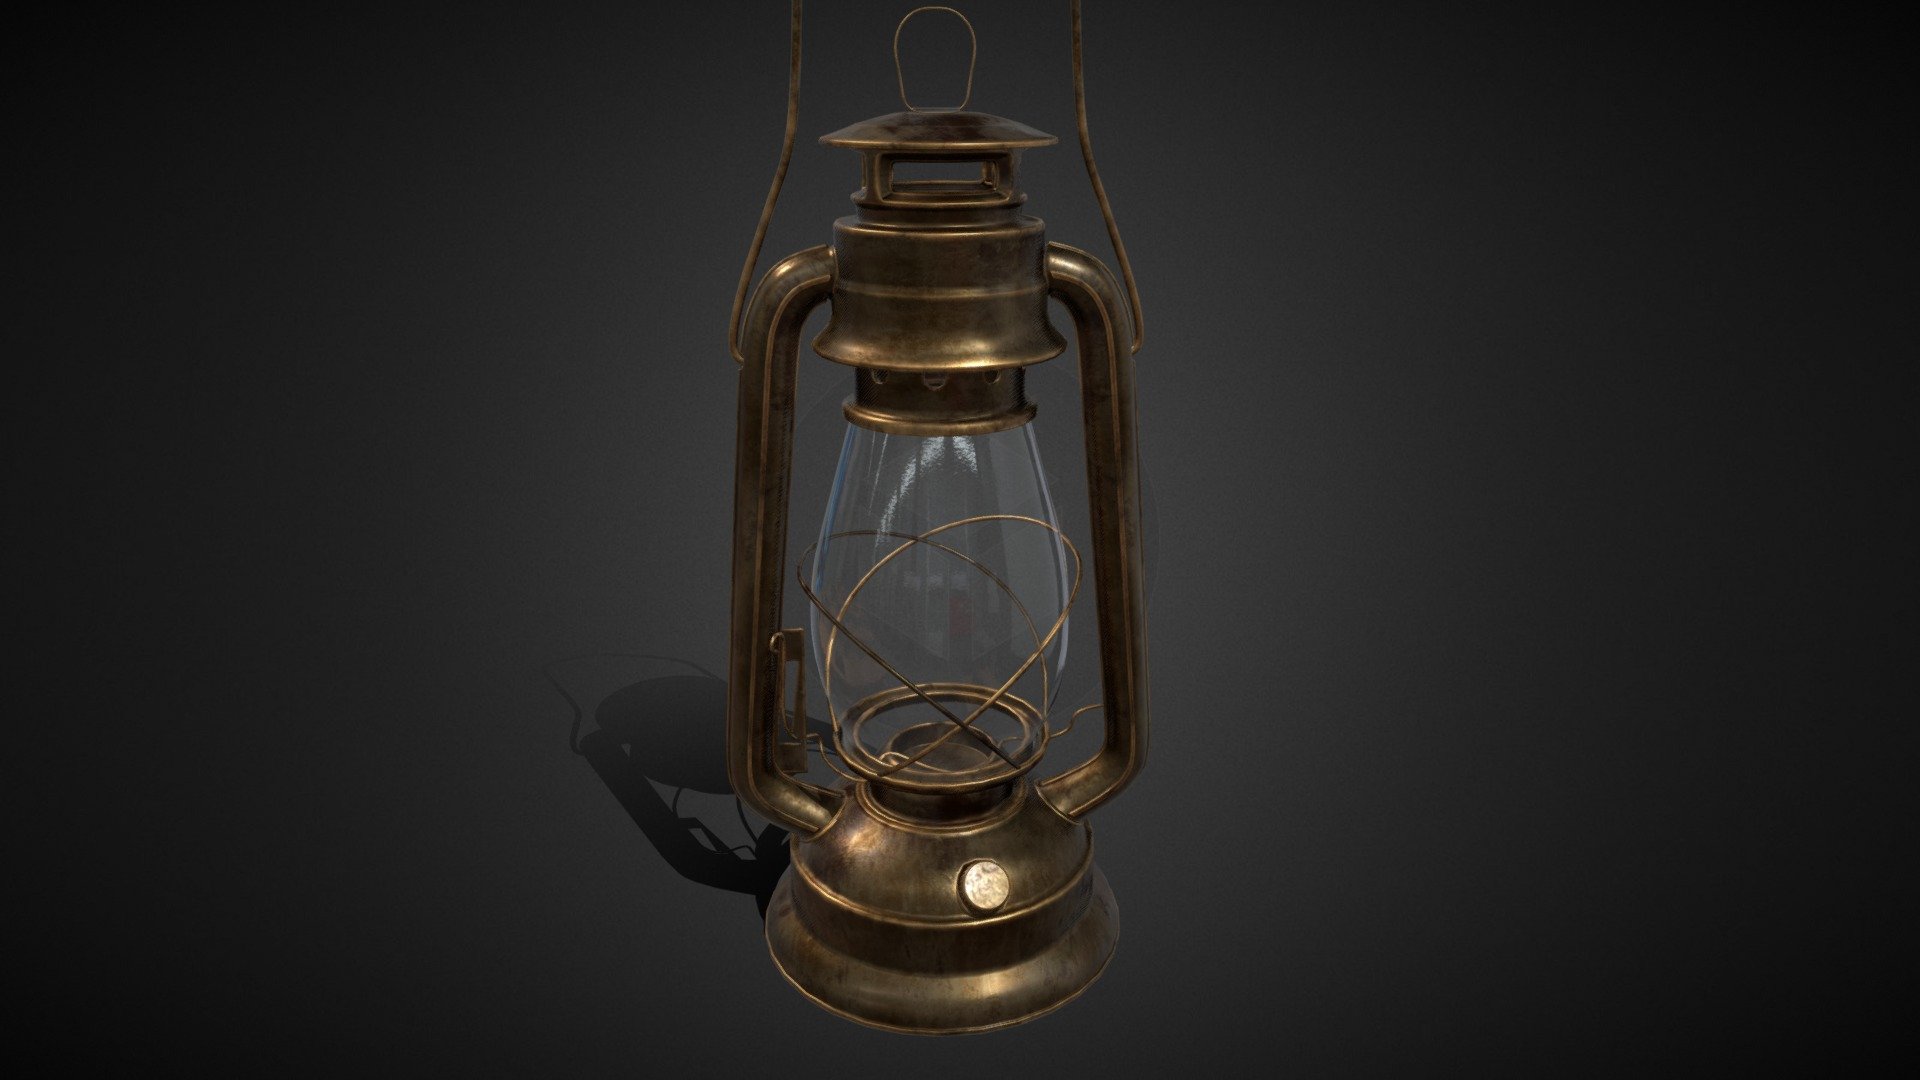 Mid Poly Old Lantern.

Download Includes:




.fbx and .obj  file.

2k Albedo, Metalness, Normal, and roughness maps for Lantern

2k Normal and Roughness maps for glass

.blend file 

more personal work on Instagram: khan_yasin1125.

Made Using: blender, Quixel Mixer - Old Lantern - Buy Royalty Free 3D model by KhanYasin_1125 (@Khan_Yasin1125) 3d model